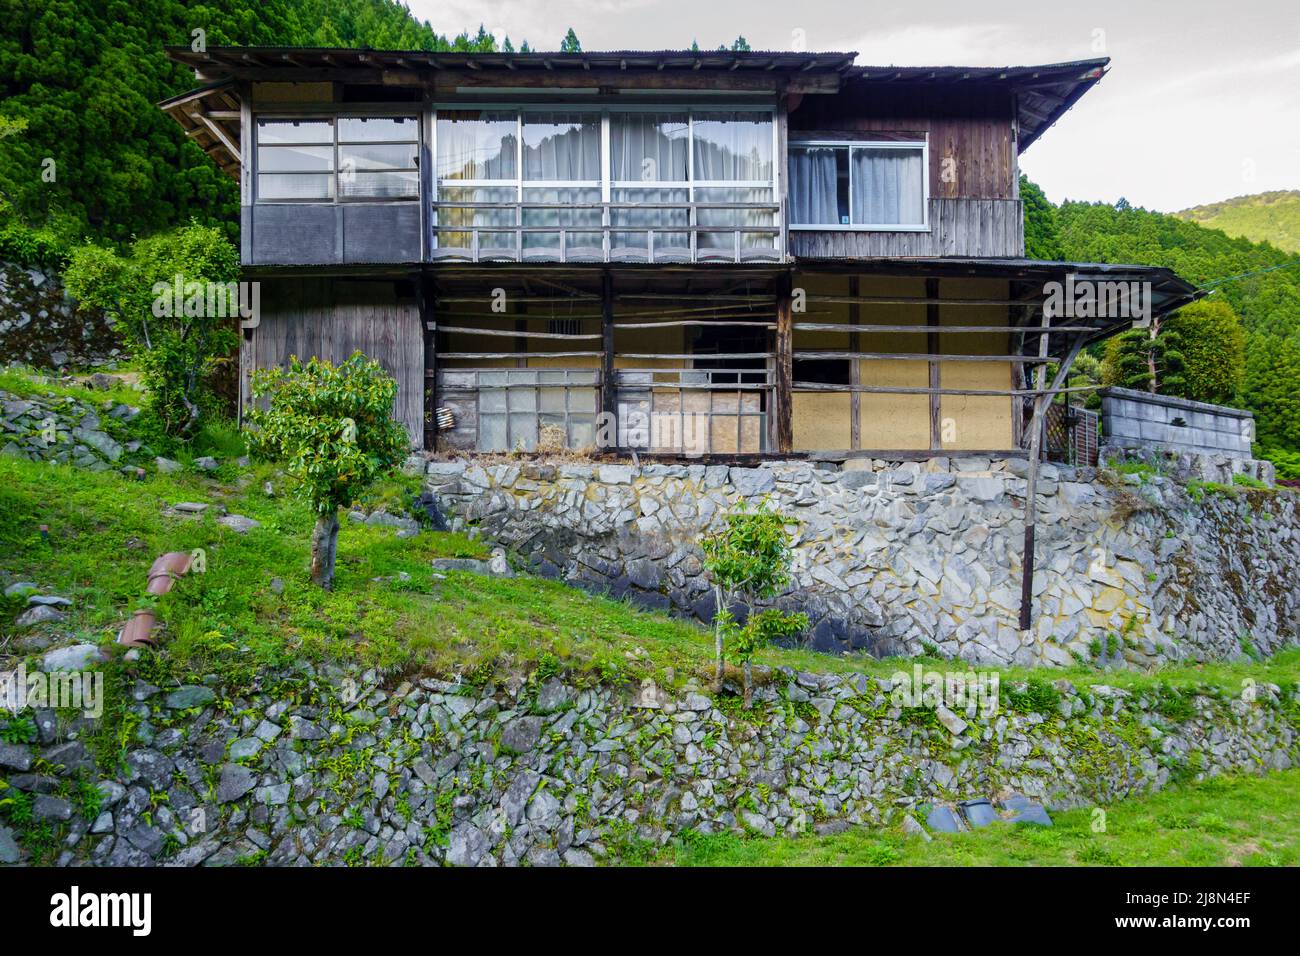 Exterior front view of old Japanese house with large windows and stone foundation in rural mountains Stock Photo